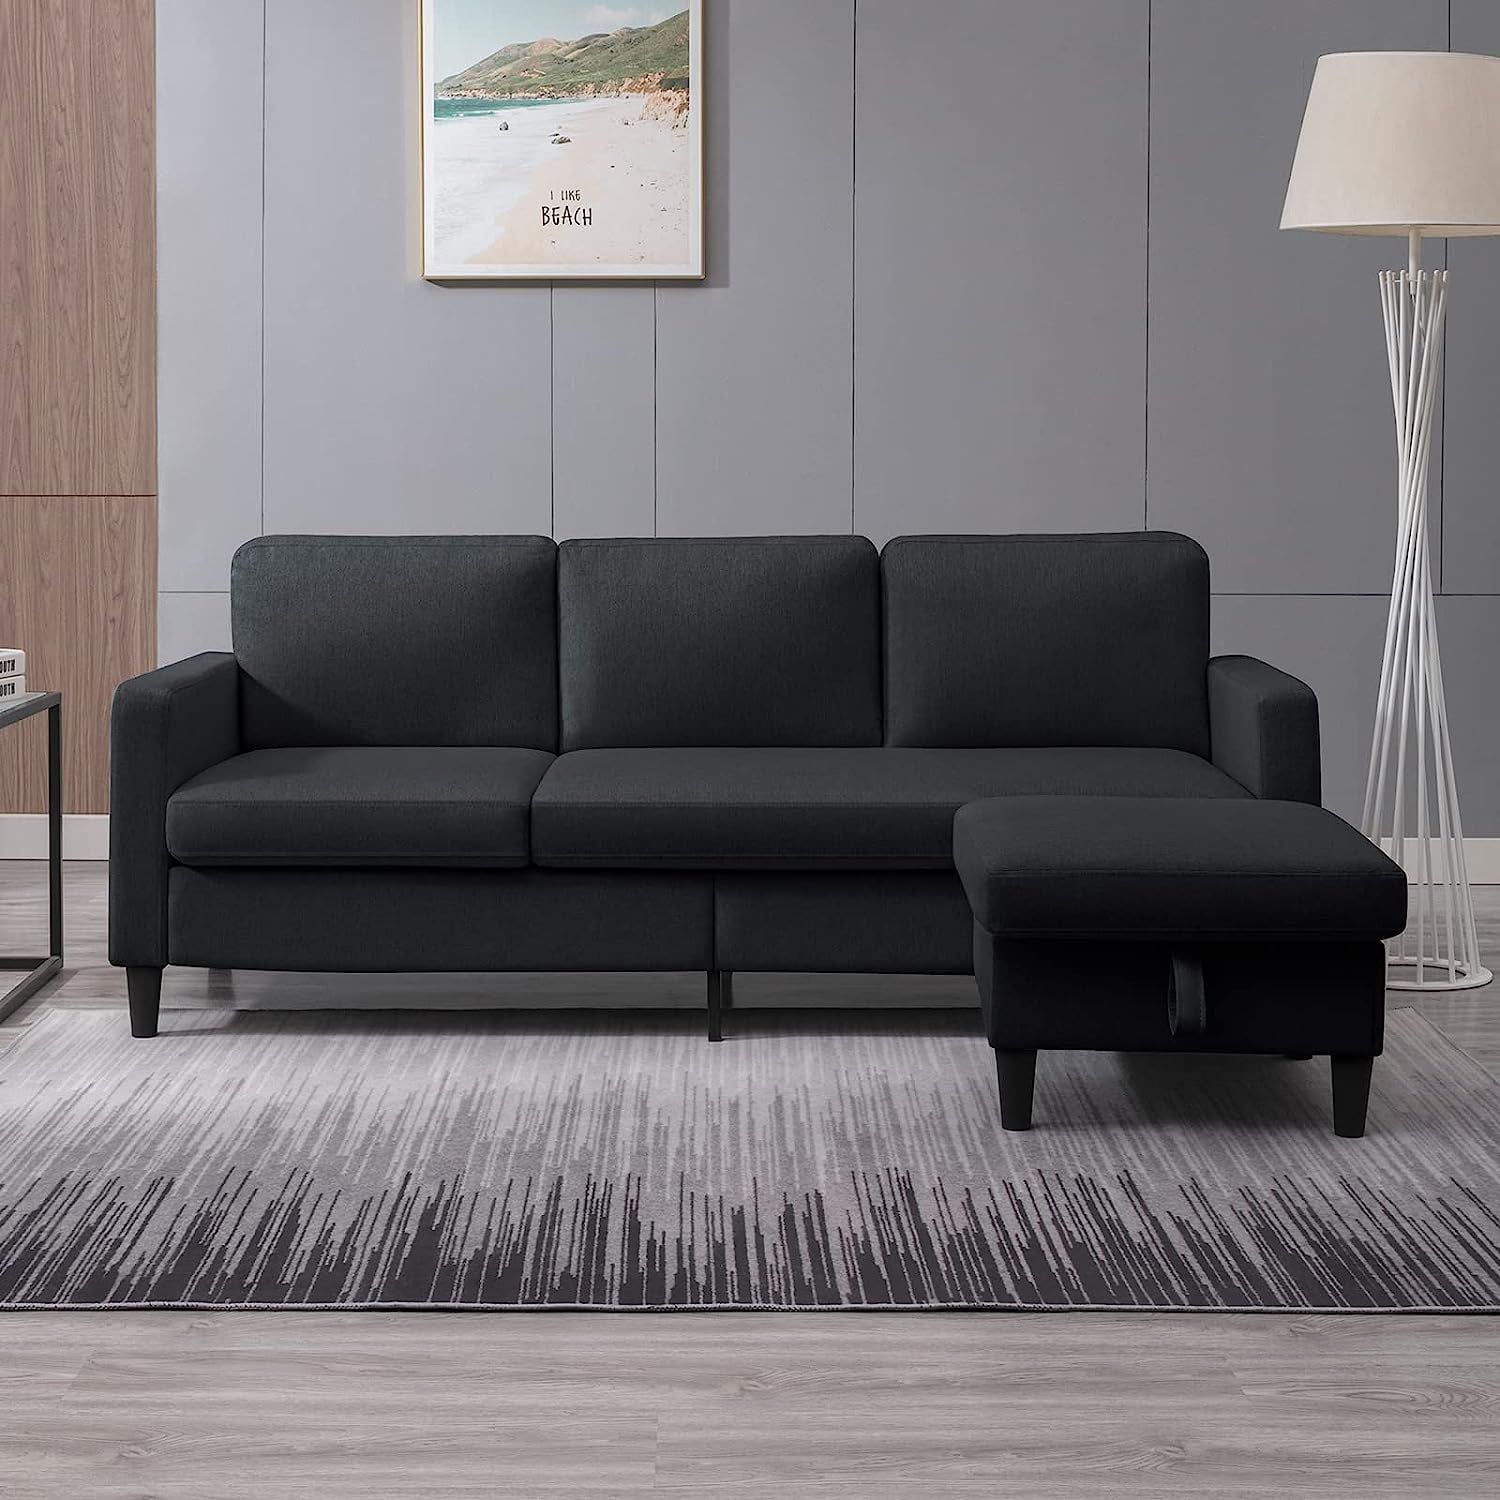 Mjkone 76" W Convertible Sectional Sofa Couch With Storage Ottoman,  L Shaped Couch, 3 Seat Sofas With Reversible Chaise, Sectional Couches For  Living Room/Office/Bedroom (Dark Grey) – Walmart Inside 3 Seat Sofa Sectionals With Reversible Chaise (View 13 of 15)